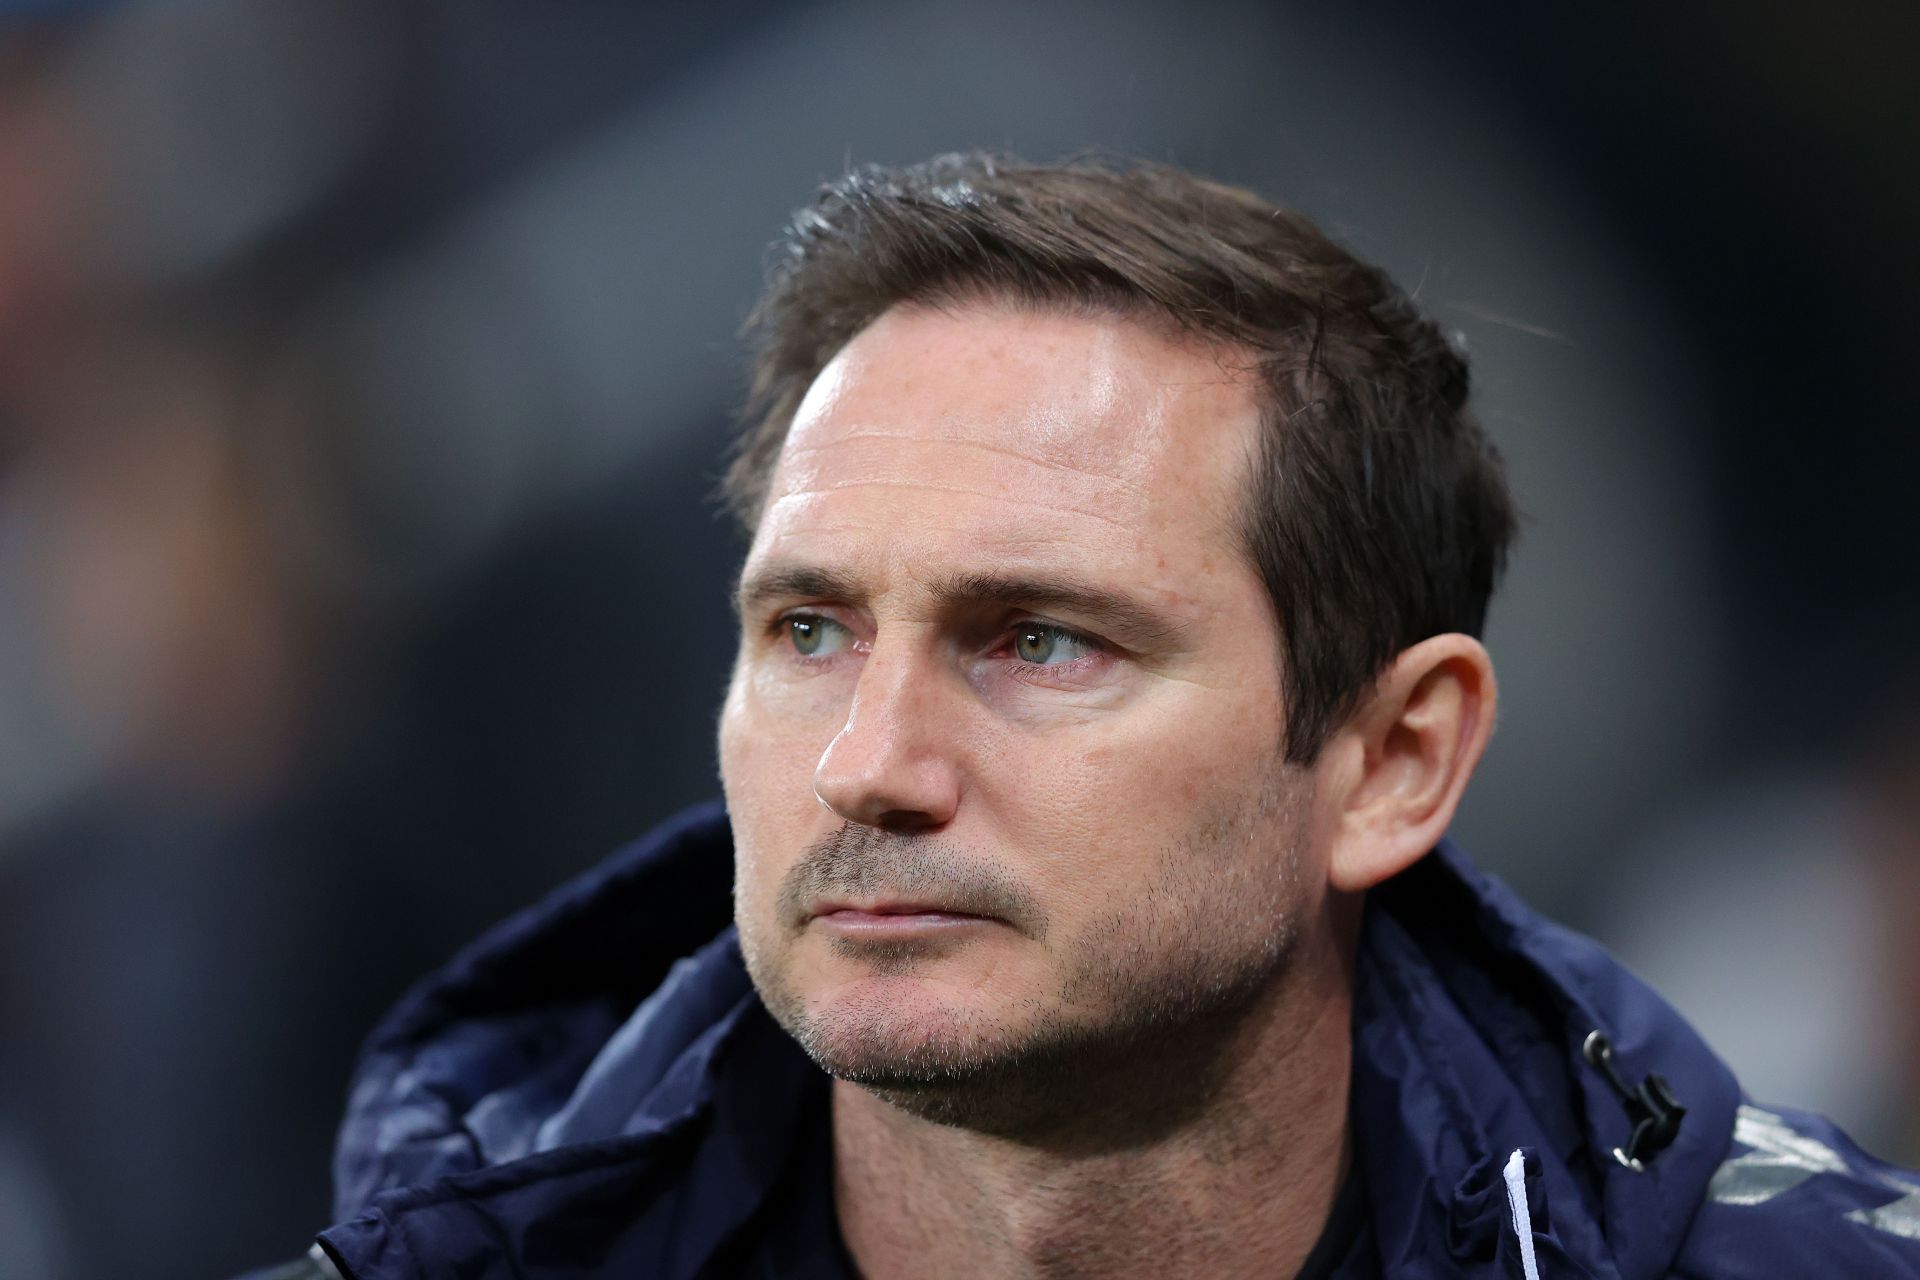 Frank Lampard is having a tough time keeping his team above relegation zone